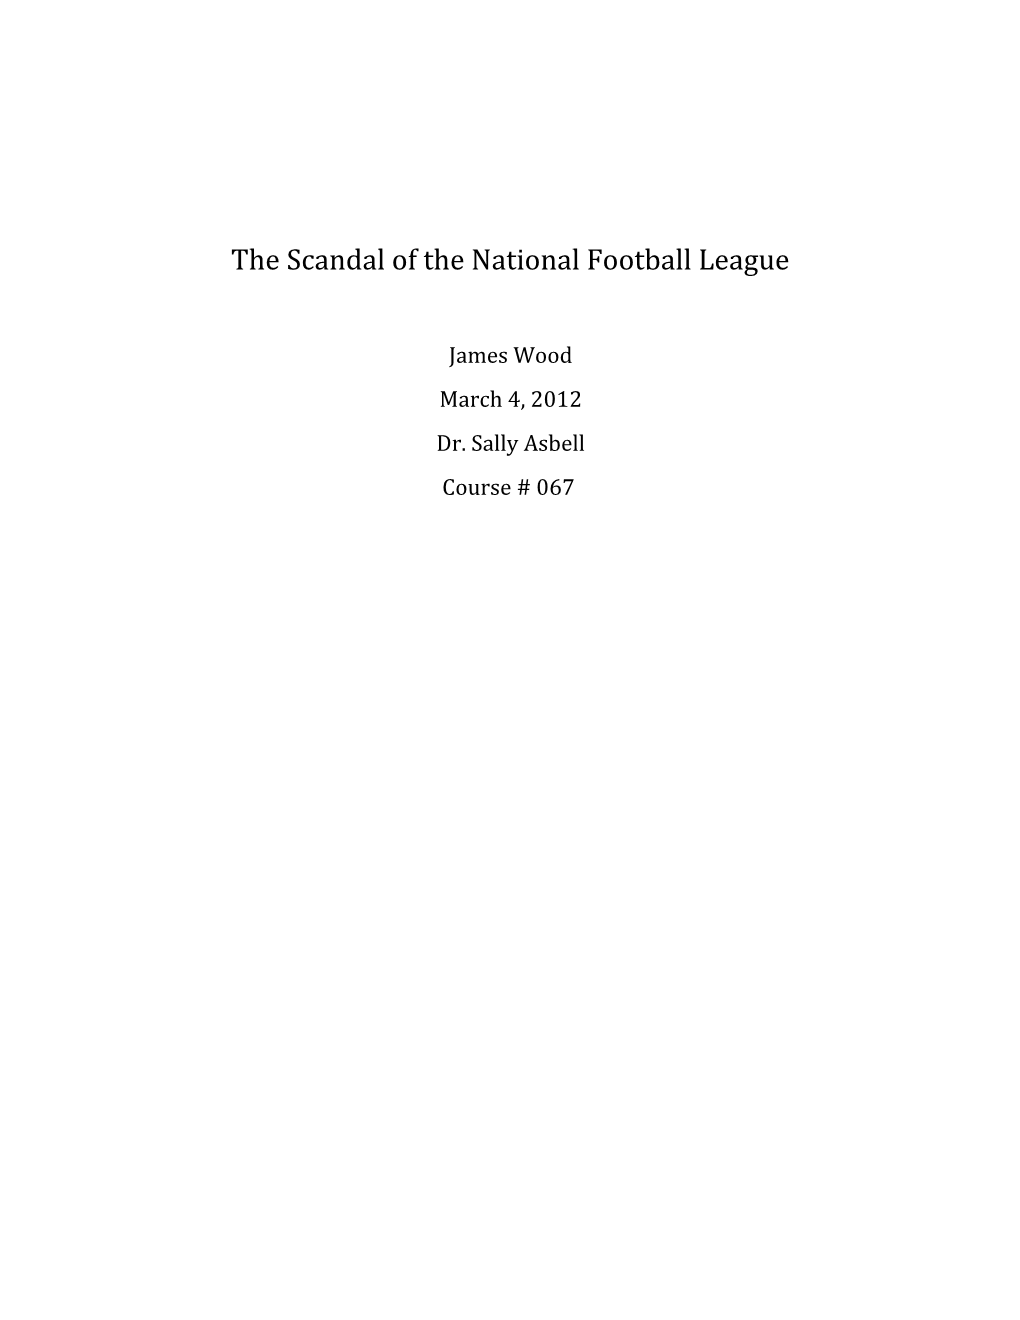 The Scandal of the National Football League